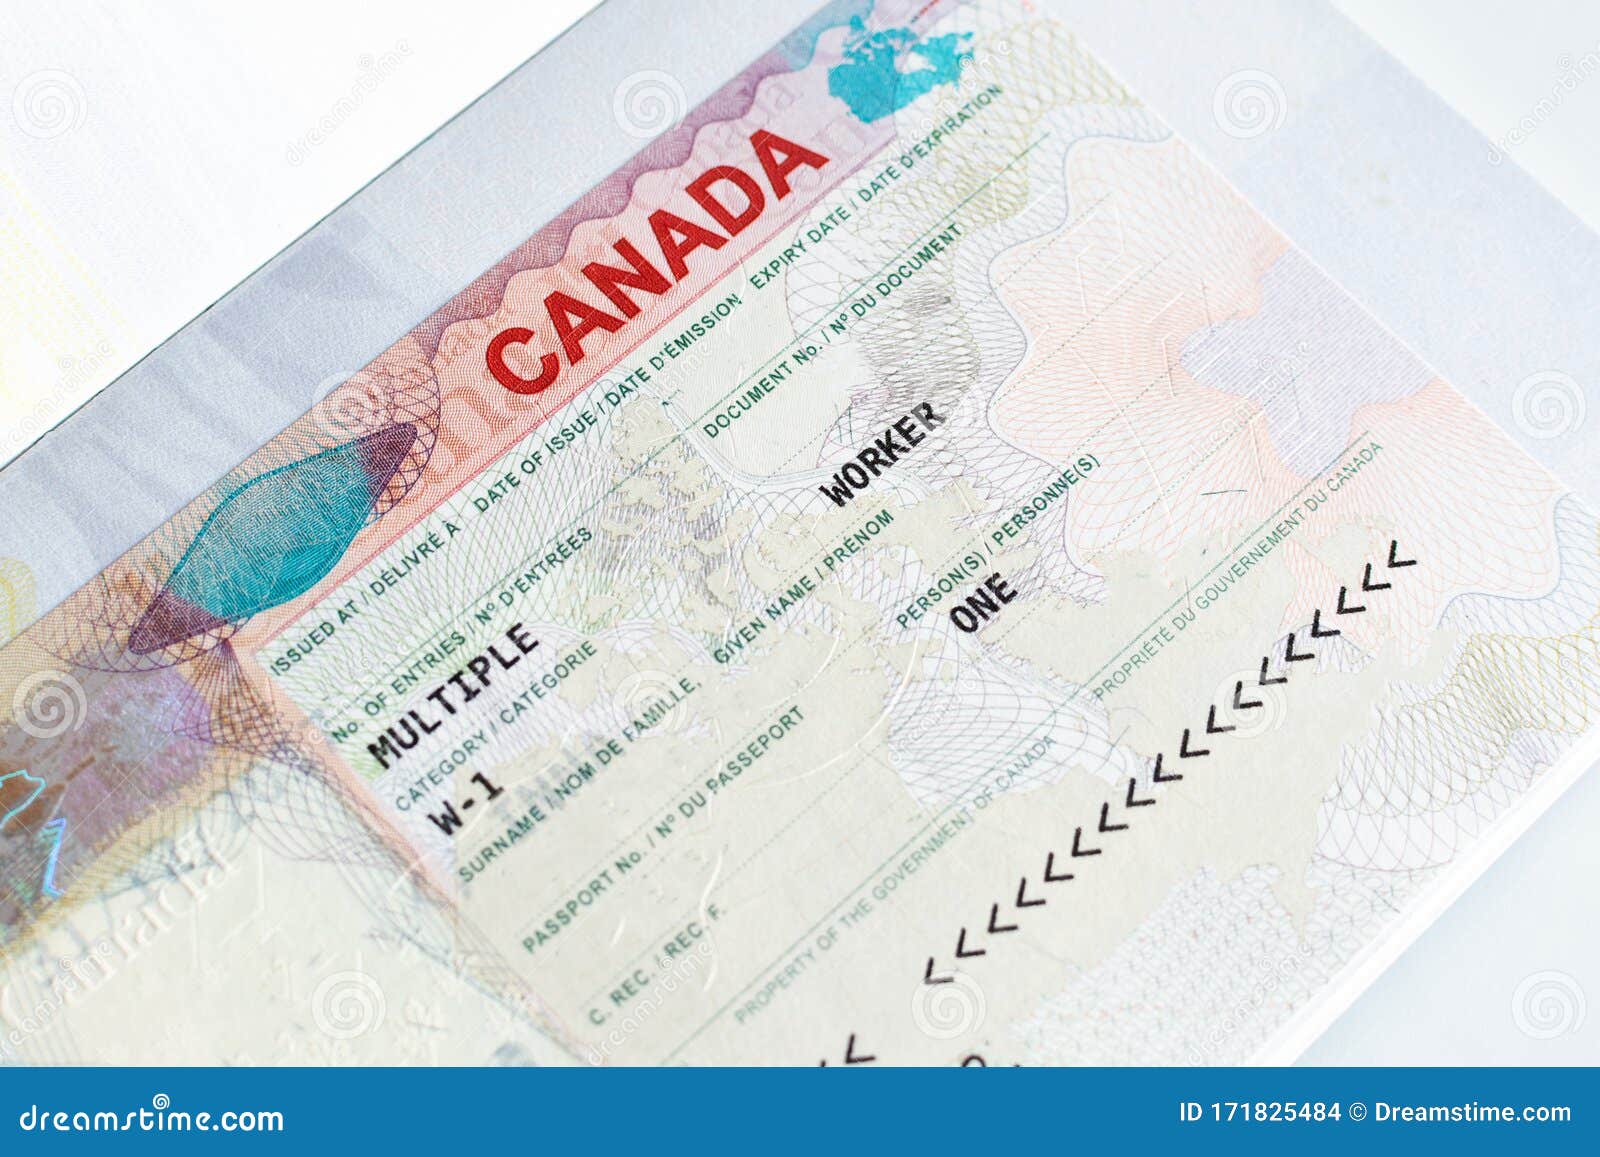 canada immigration arrival passport stamp photos free royalty free stock photos from dreamstime